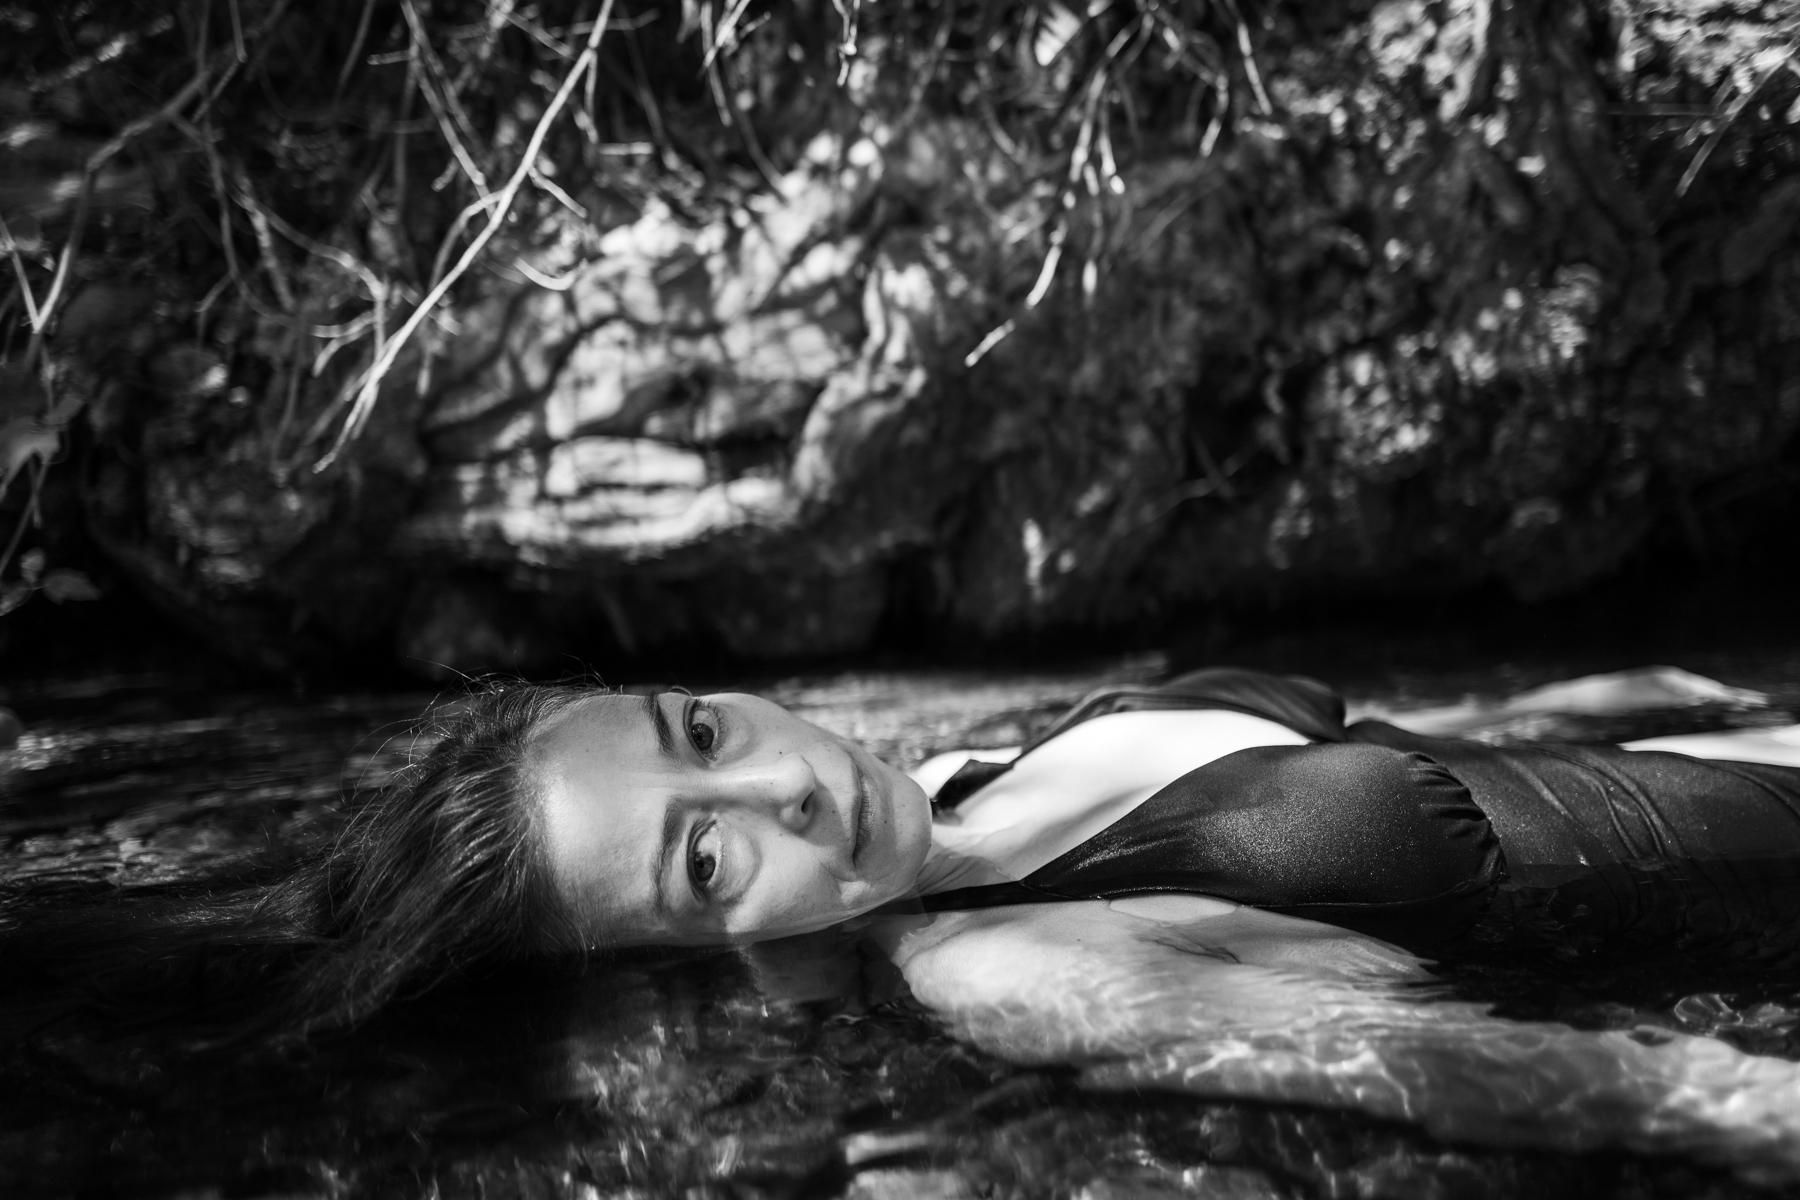  : THE WATERS WE SWIM IN : HILLARY JOHNSON PHOTOGRAPHY